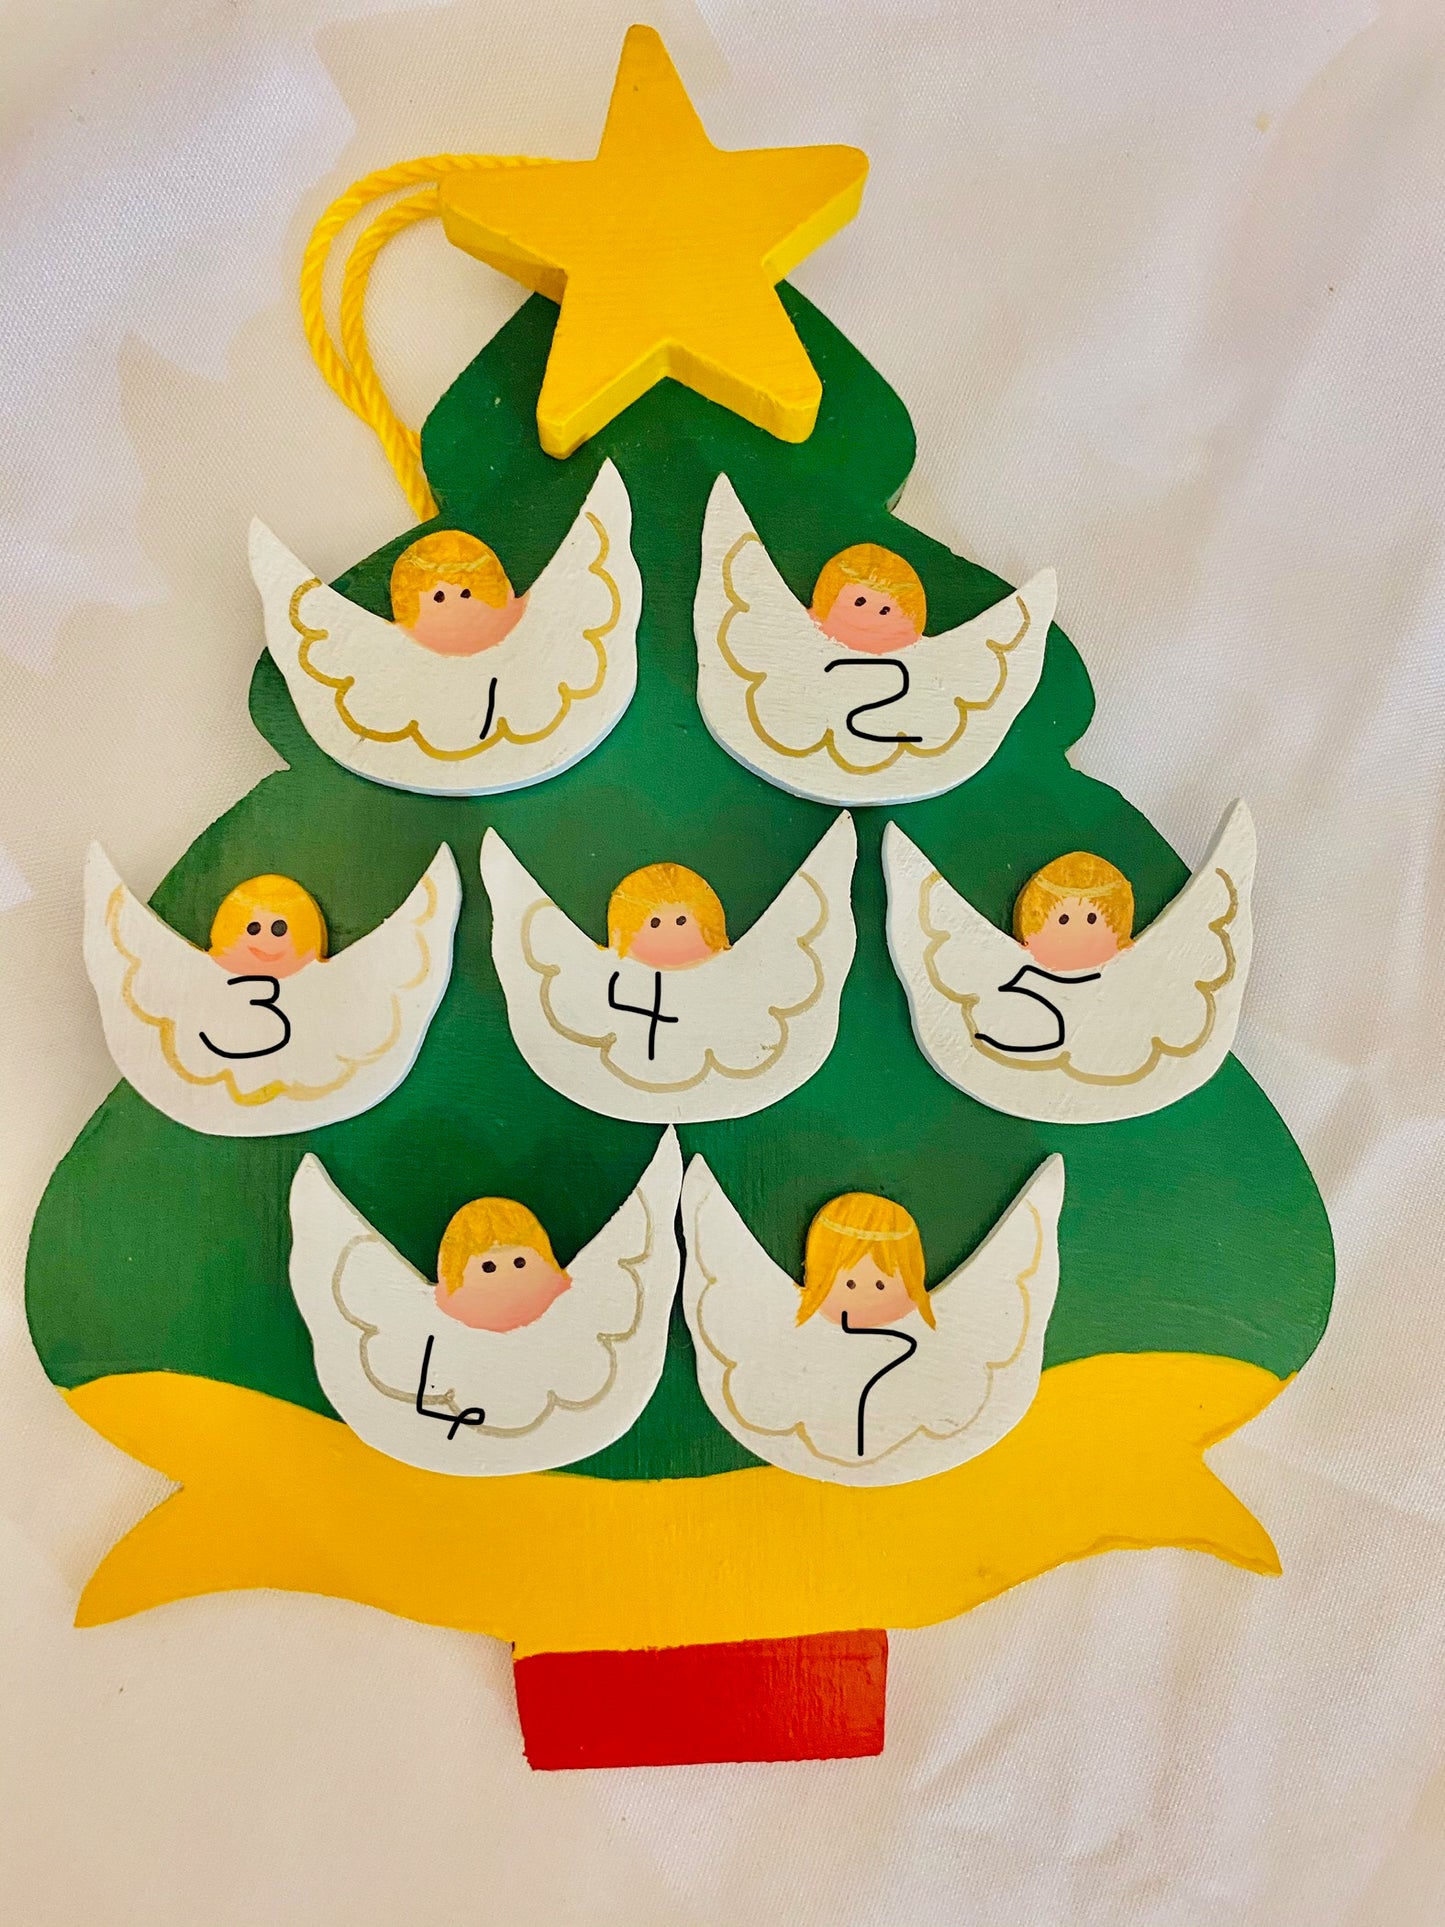 Personalized Ornament 7 Angels on a Christmas Tree 6" x 4.5"